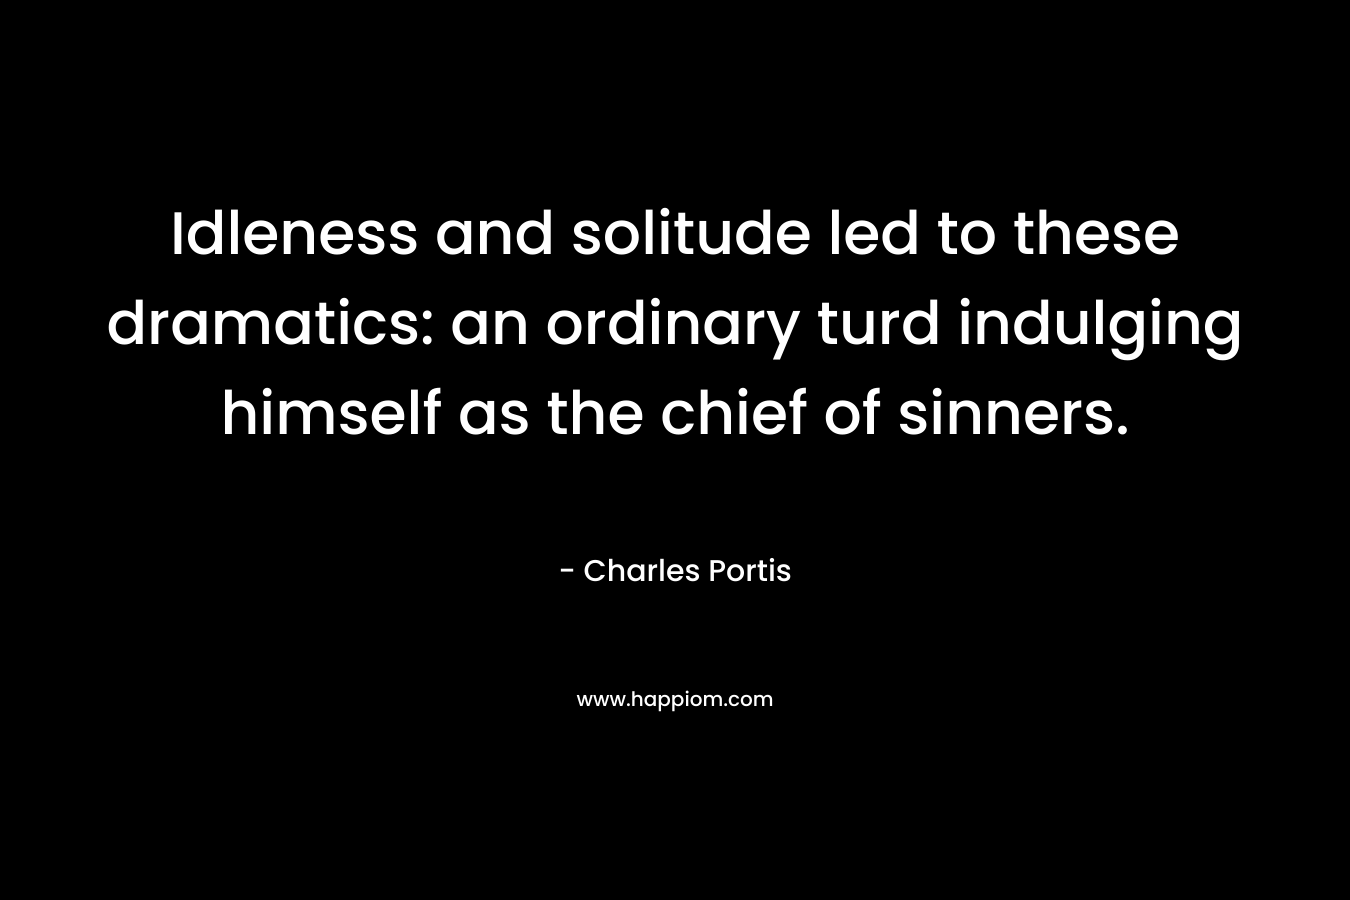 Idleness and solitude led to these dramatics: an ordinary turd indulging himself as the chief of sinners. – Charles Portis